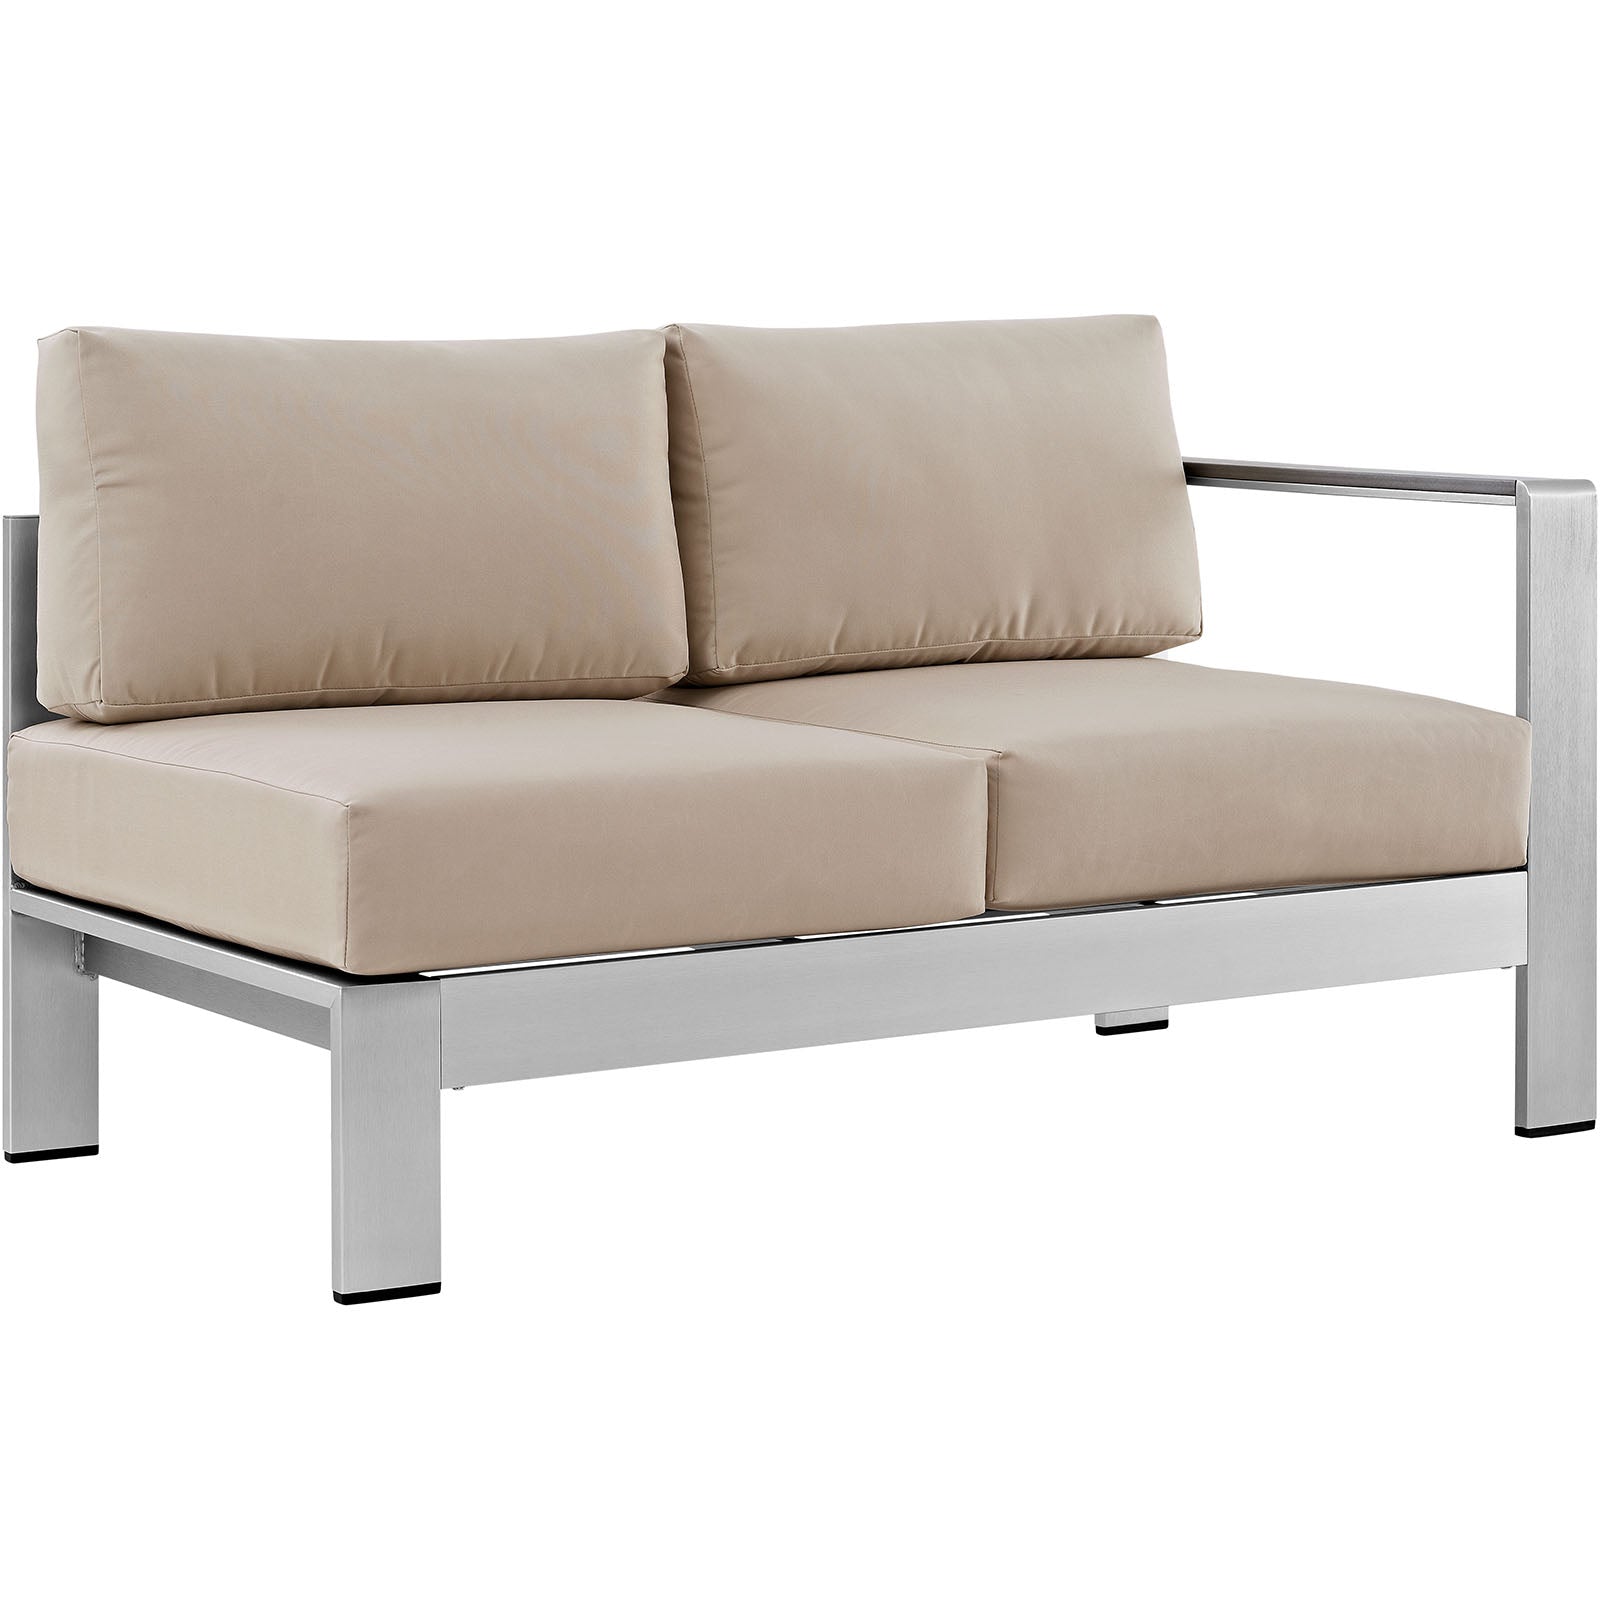 Modway Outdoor Sofas - Shore Right-Arm Corner Sectional Outdoor Patio Loveseat Silver & Beige